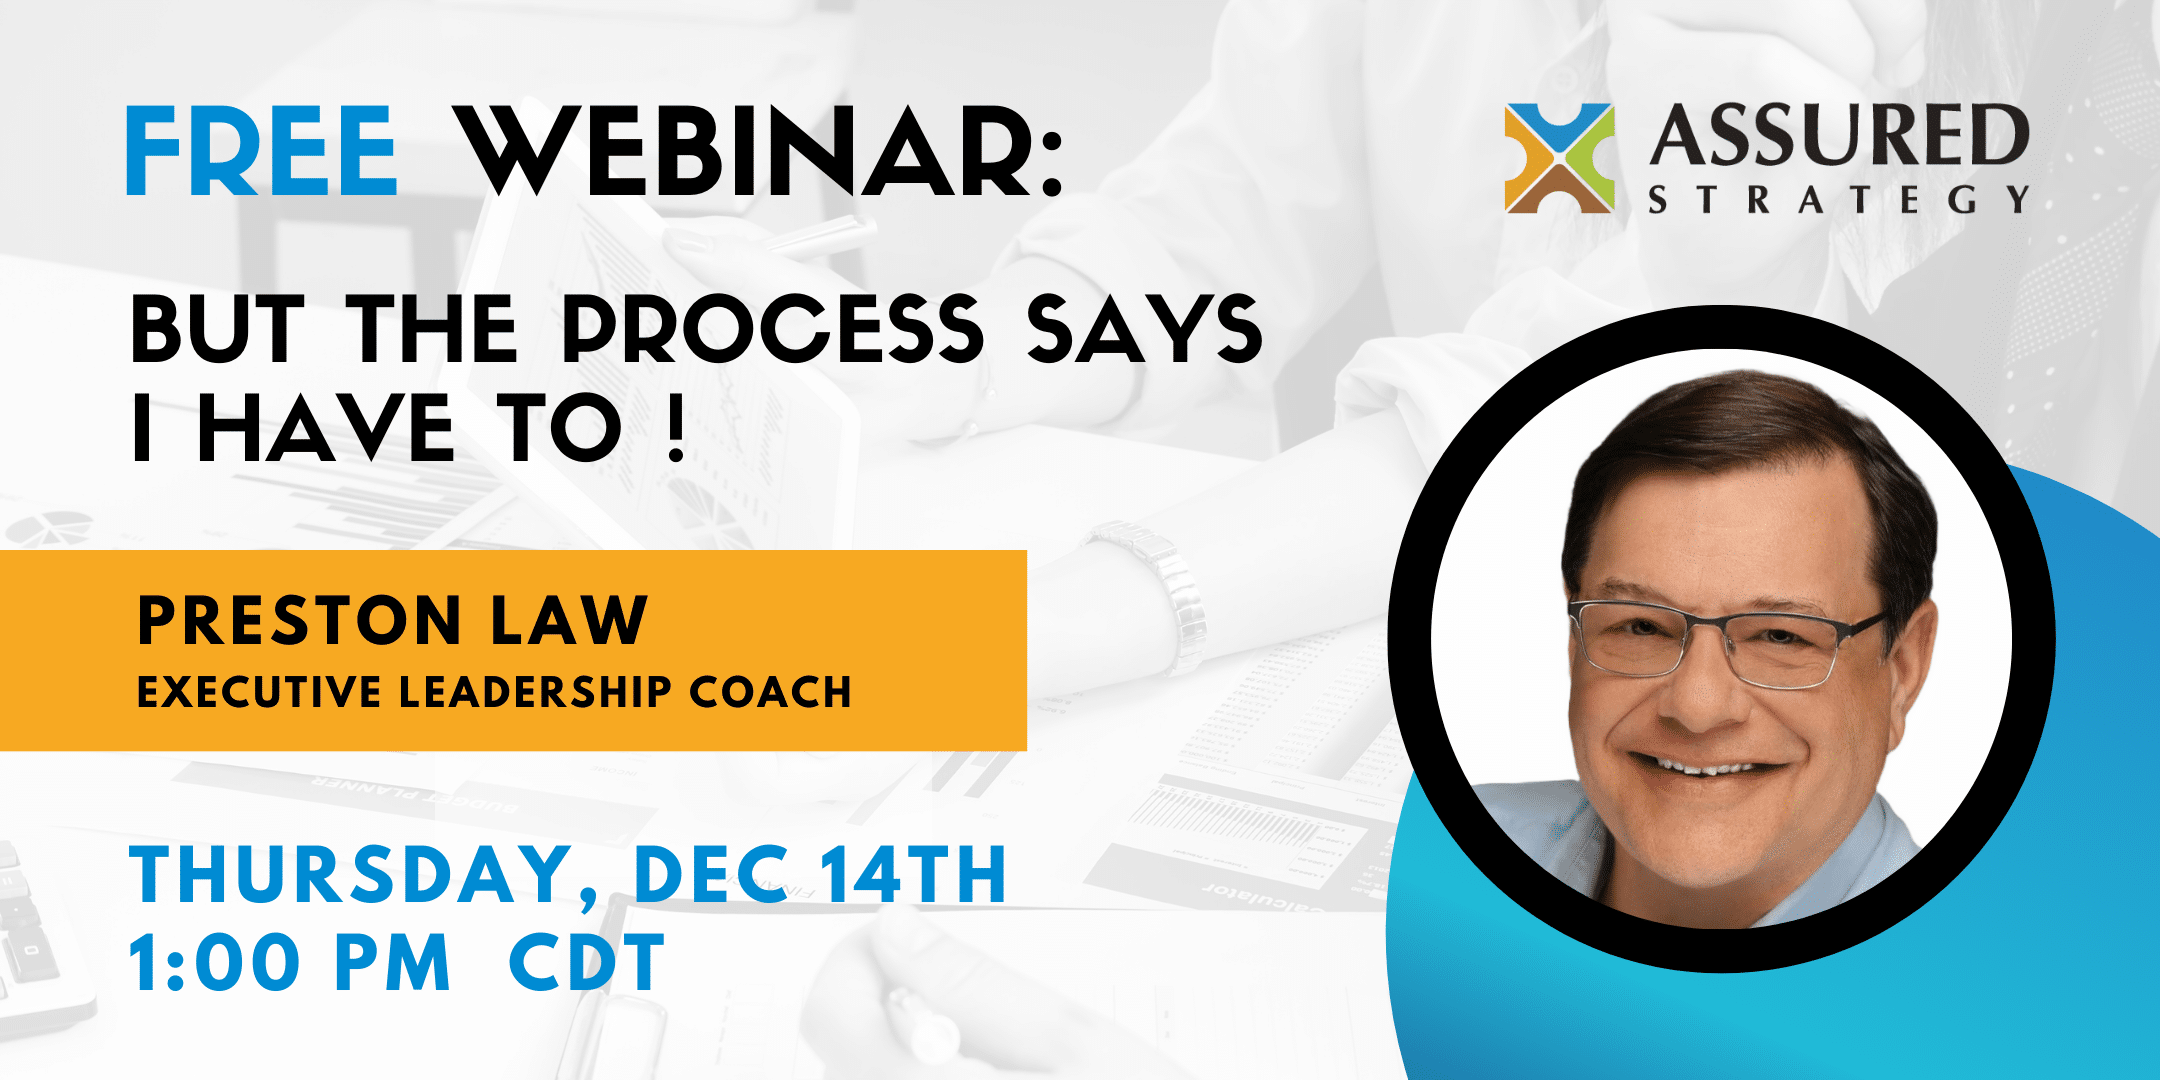 FREE Webinar: But The Process Says I Have To!